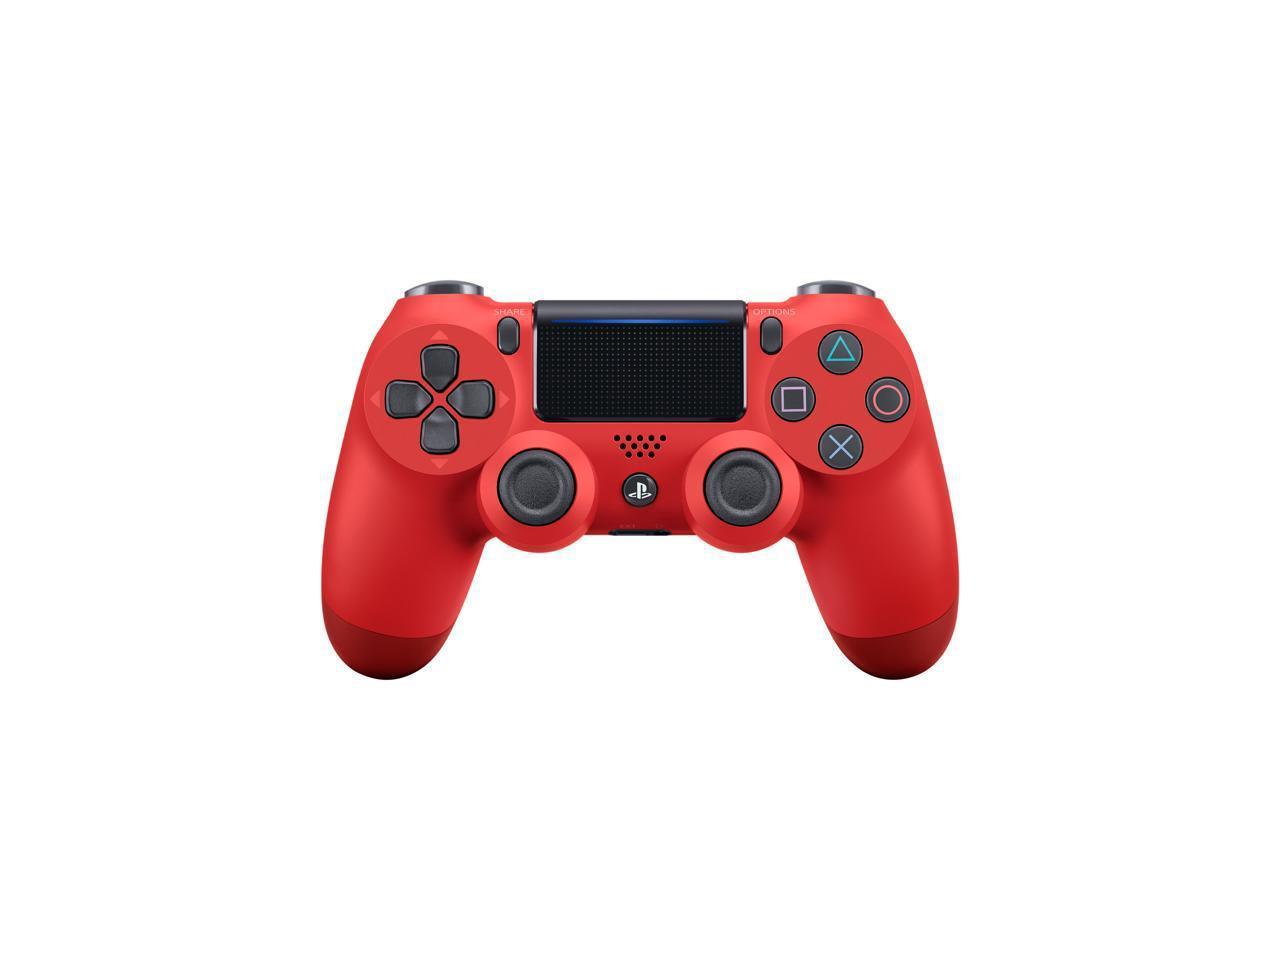 OEM DualShock 4 Wireless Controller for Sony PlayStation 4 - red (CUH-ZCT2)